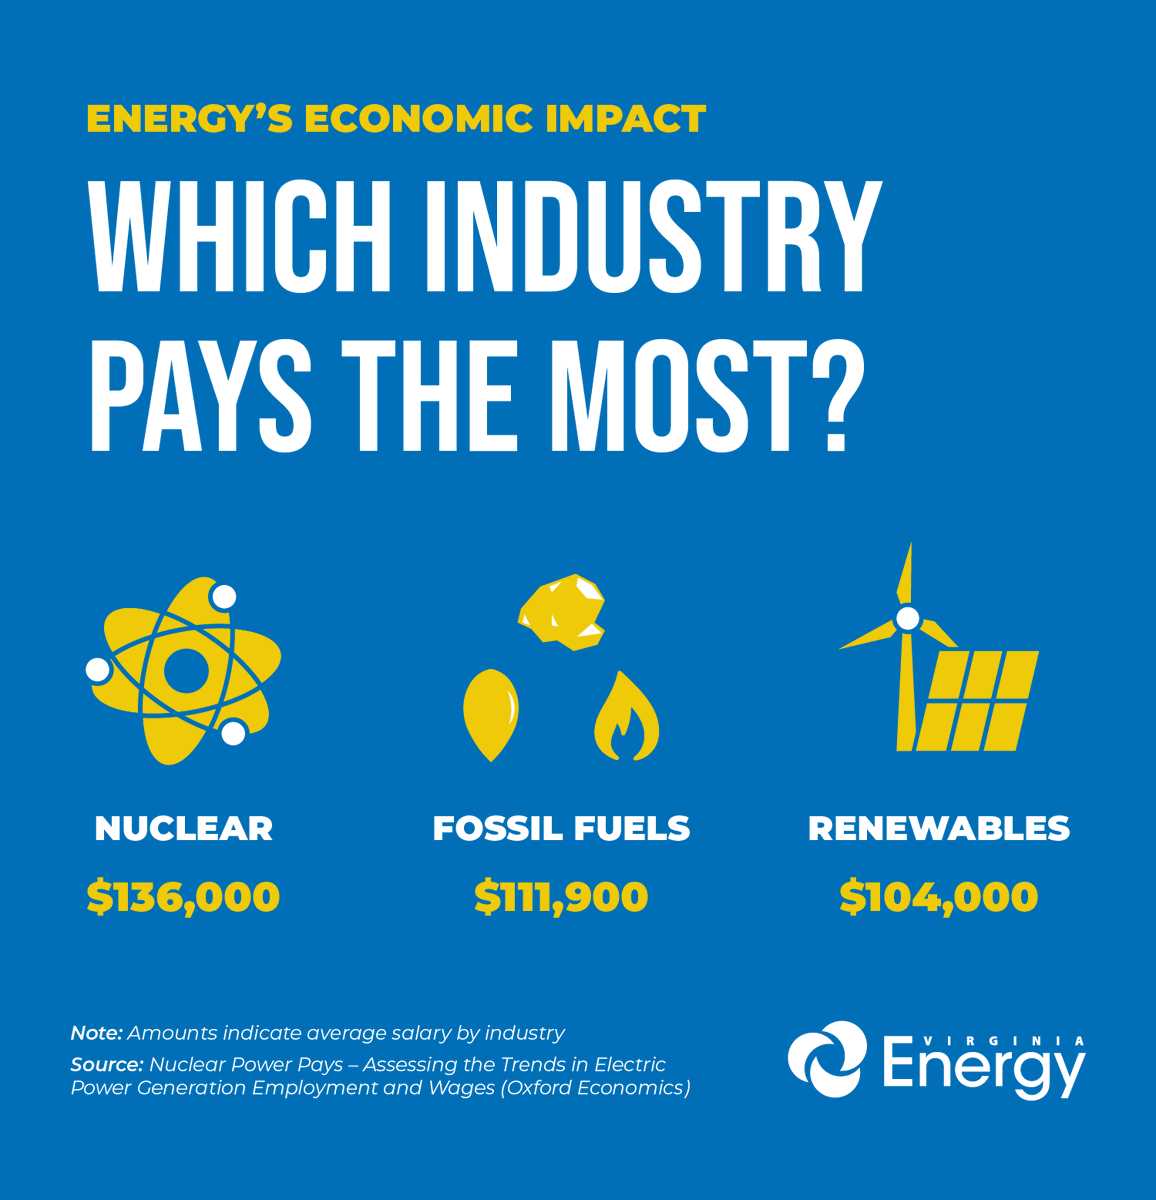 Building Virginia's energy future provides various jobs for people from diverse backgrounds. Whether fresh out of high school, finishing your doctorate or decades into your career, Virginia's all-of-the-above energy plan has a place for you. Learn more at energy.virginia.gov